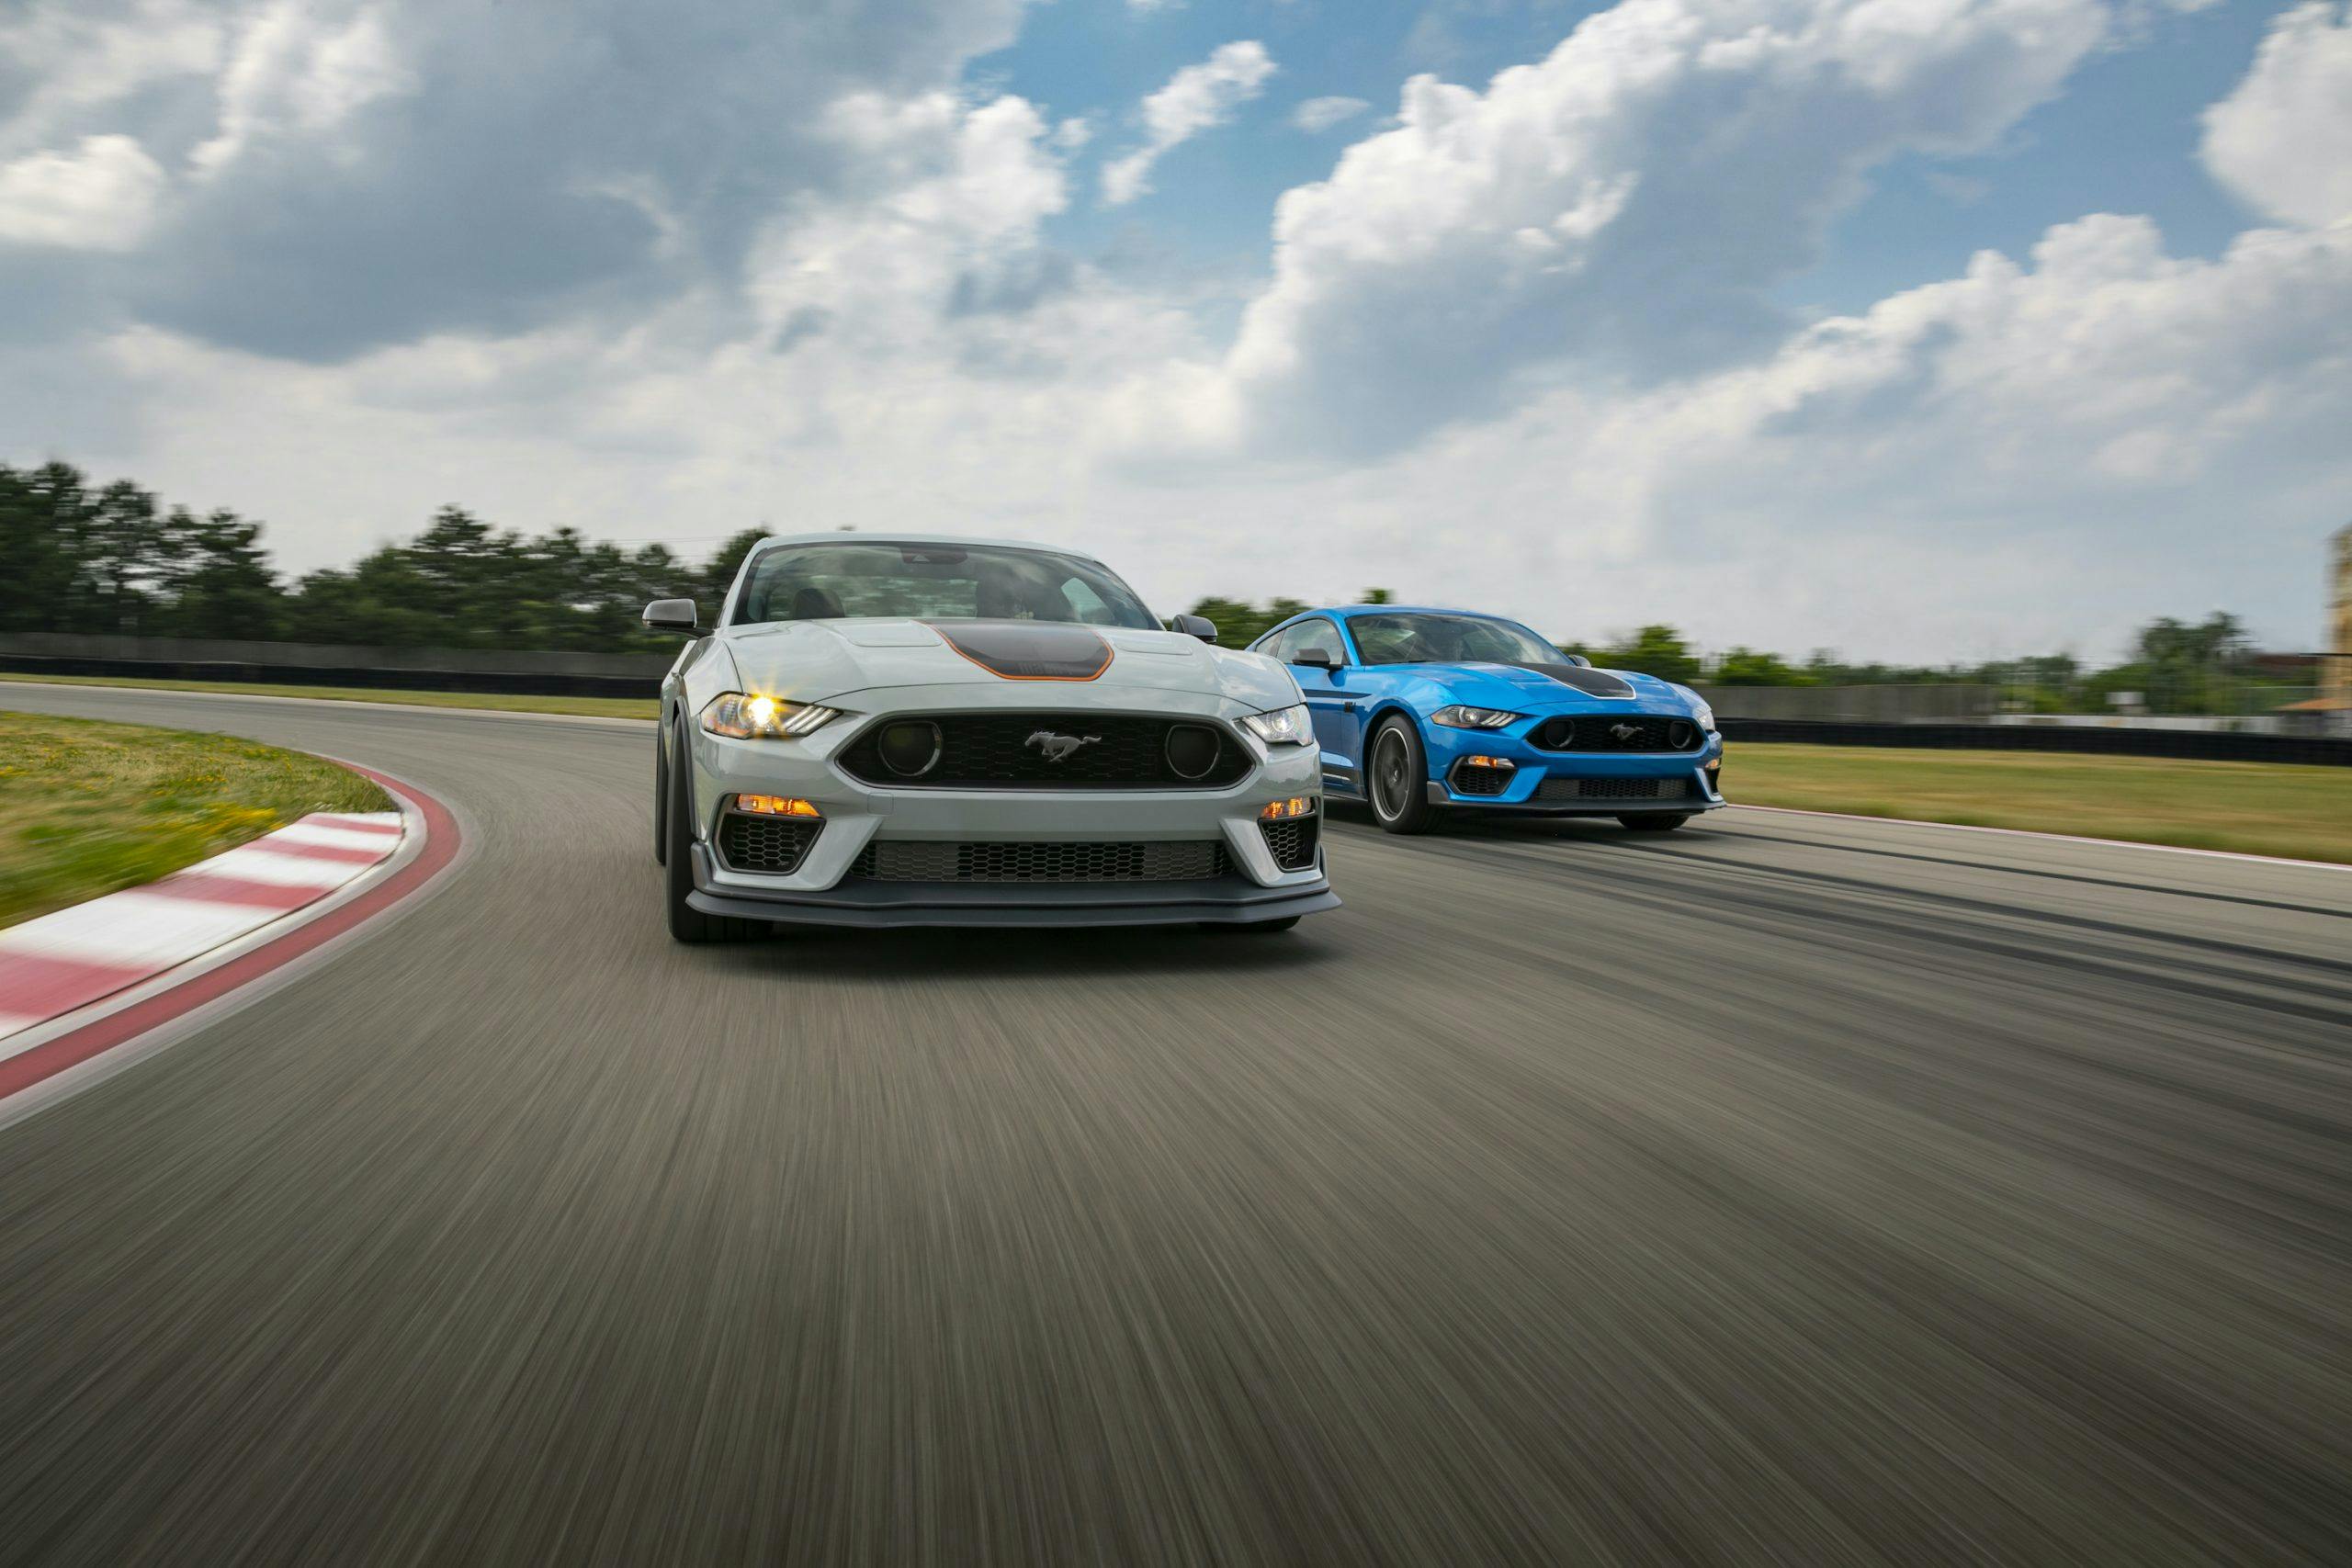 2021 Ford Mustang Mach 1 Cars action